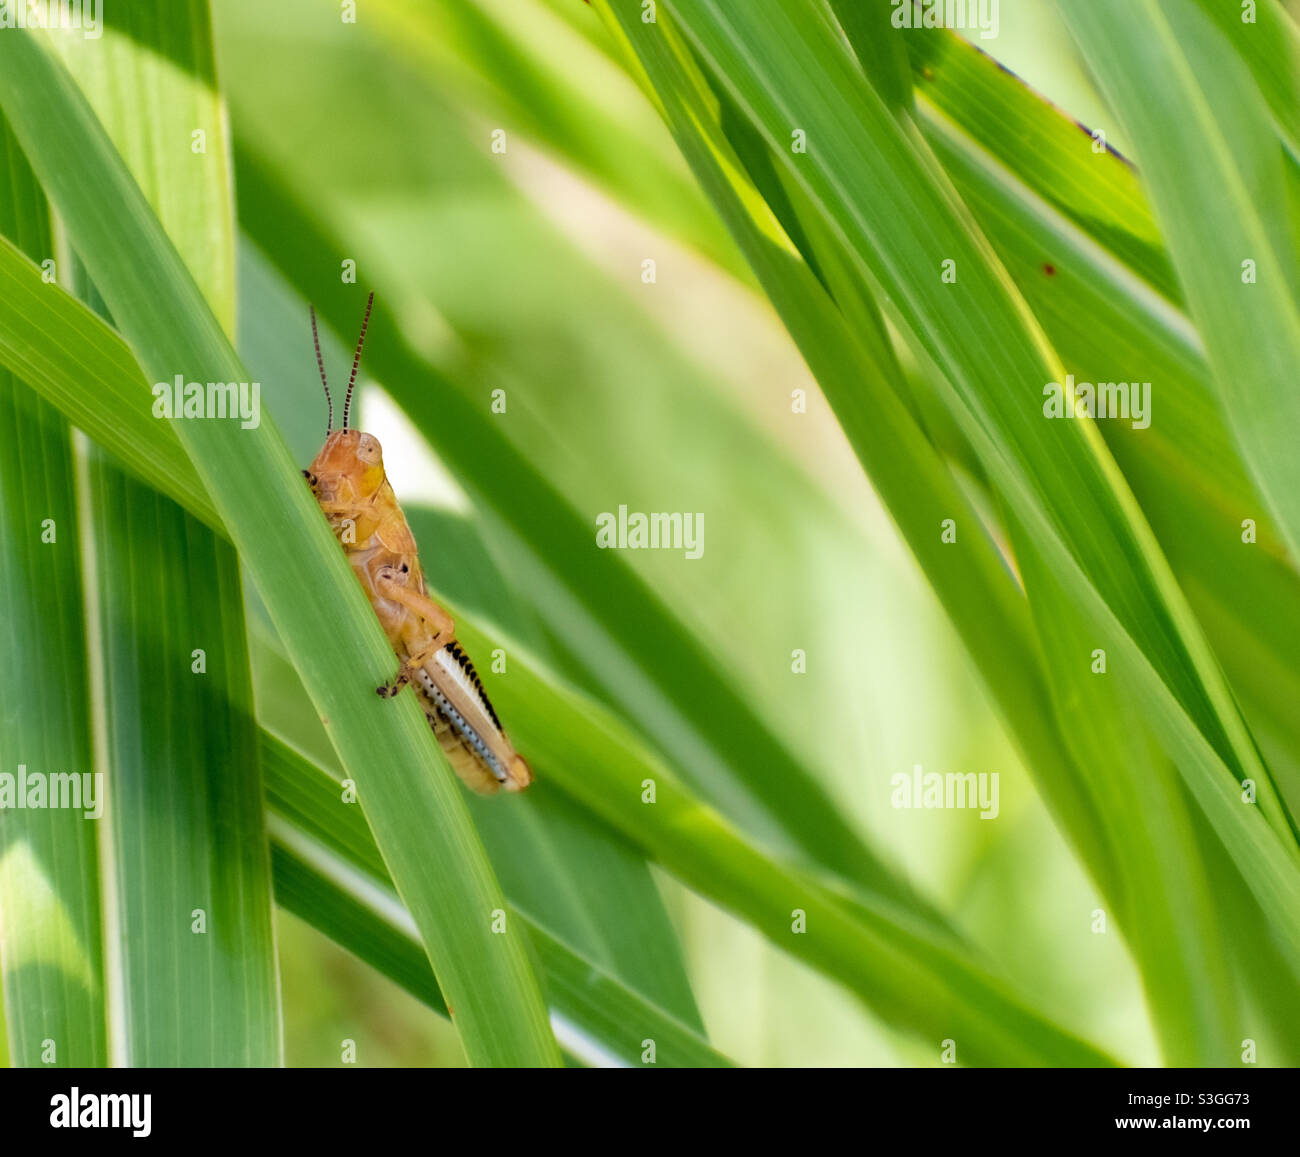 Single grasshopper on thick blade of grass. Stock Photo